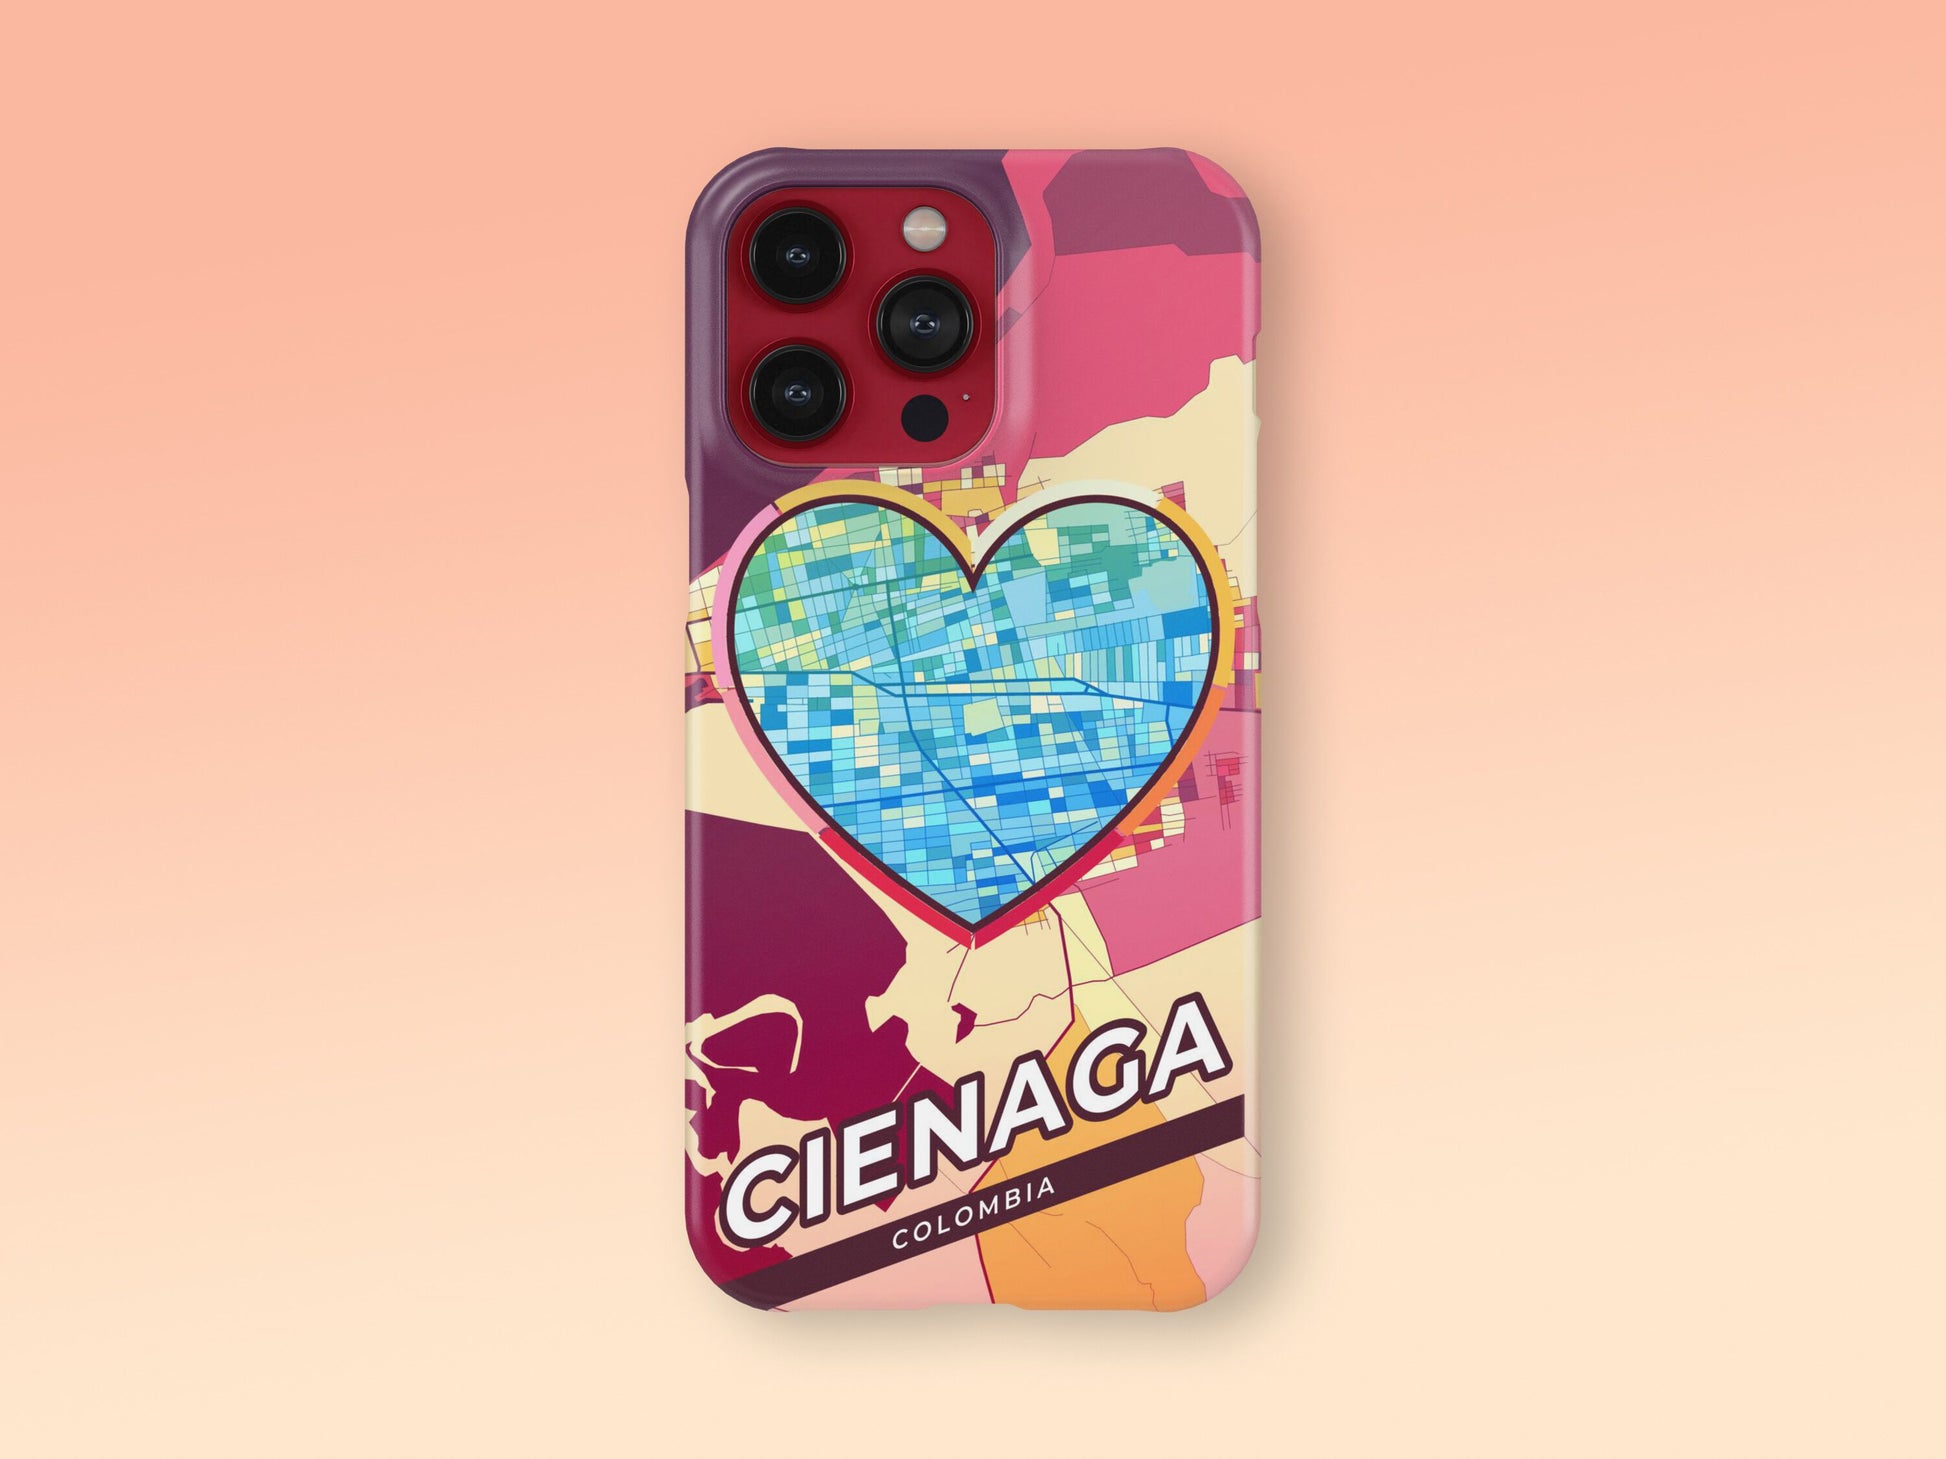 Cienaga Colombia slim phone case with colorful icon. Birthday, wedding or housewarming gift. Couple match cases. 2